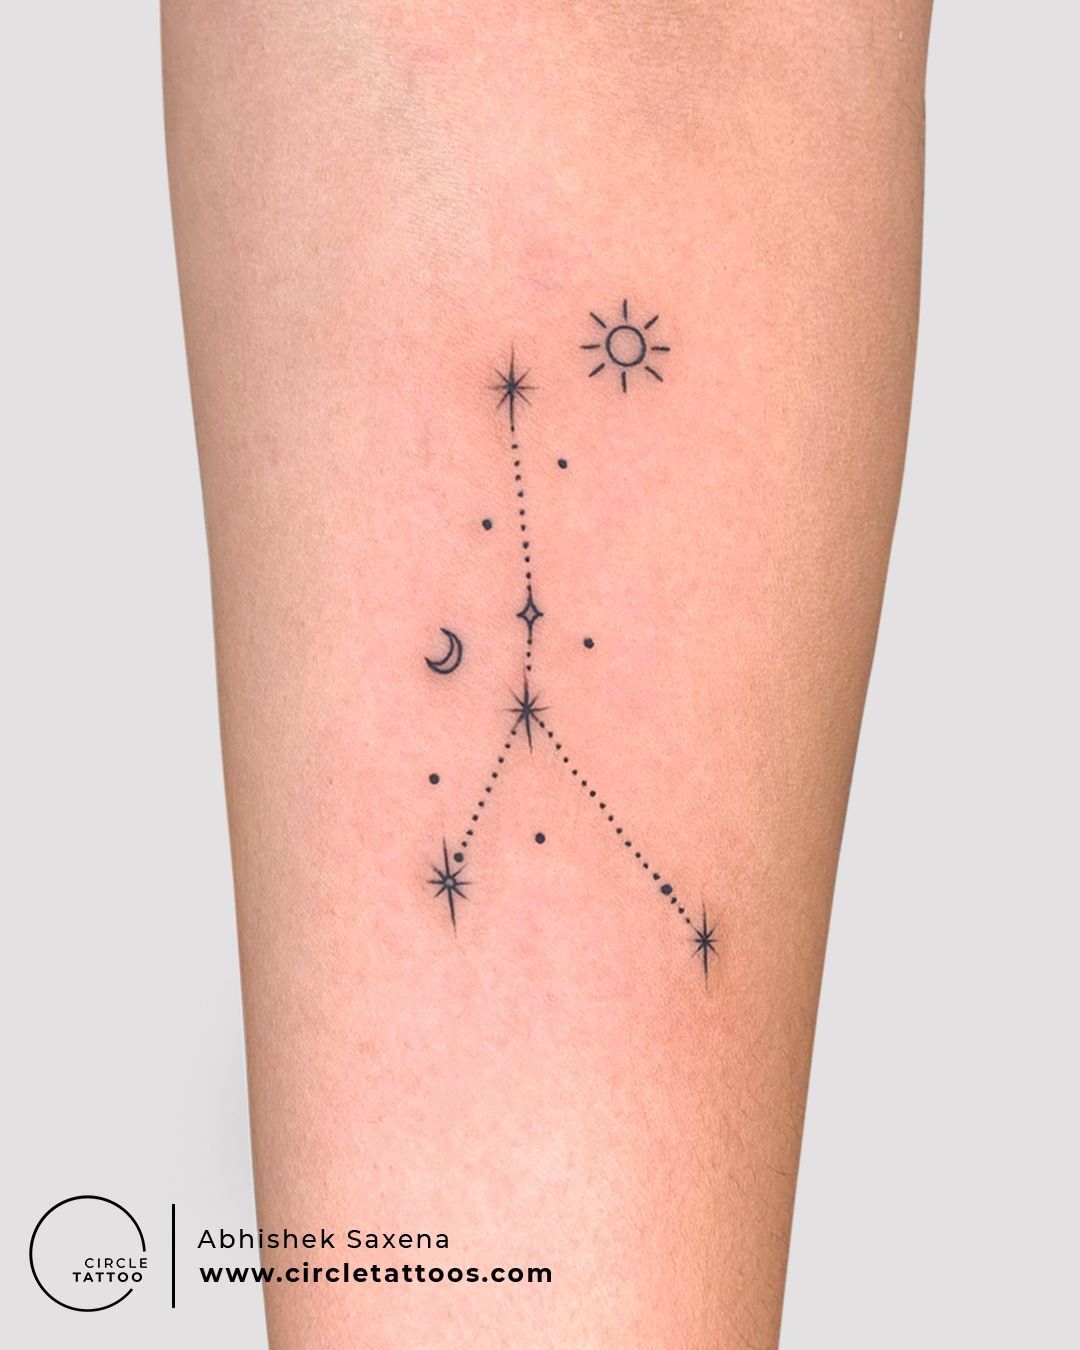 My First Tatto - The Fae Star by Destiny-Weaver on DeviantArt